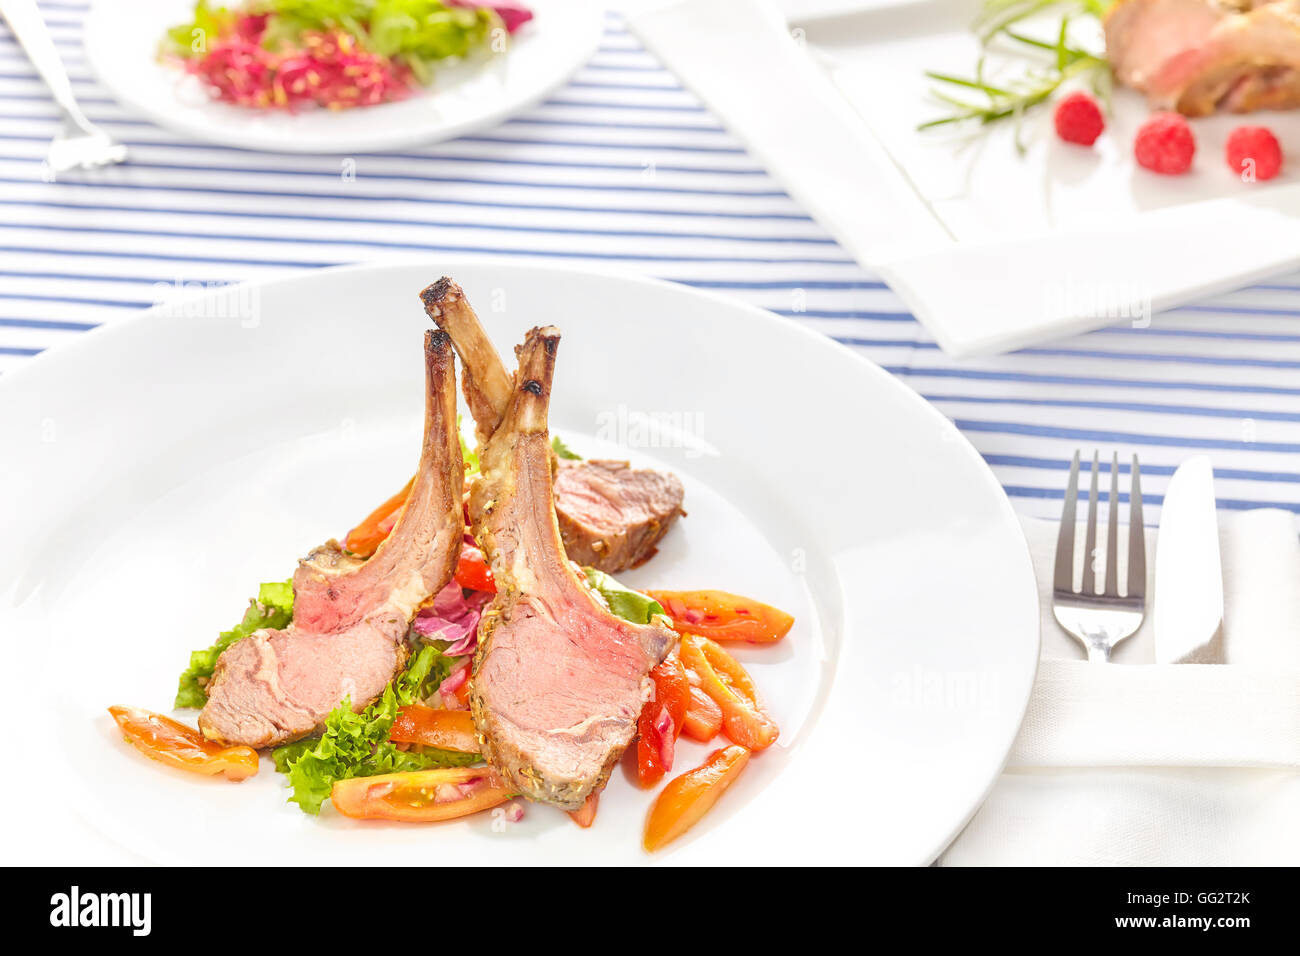 Roasted lamb rib chops with vegetables, dinner setting. Stock Photo